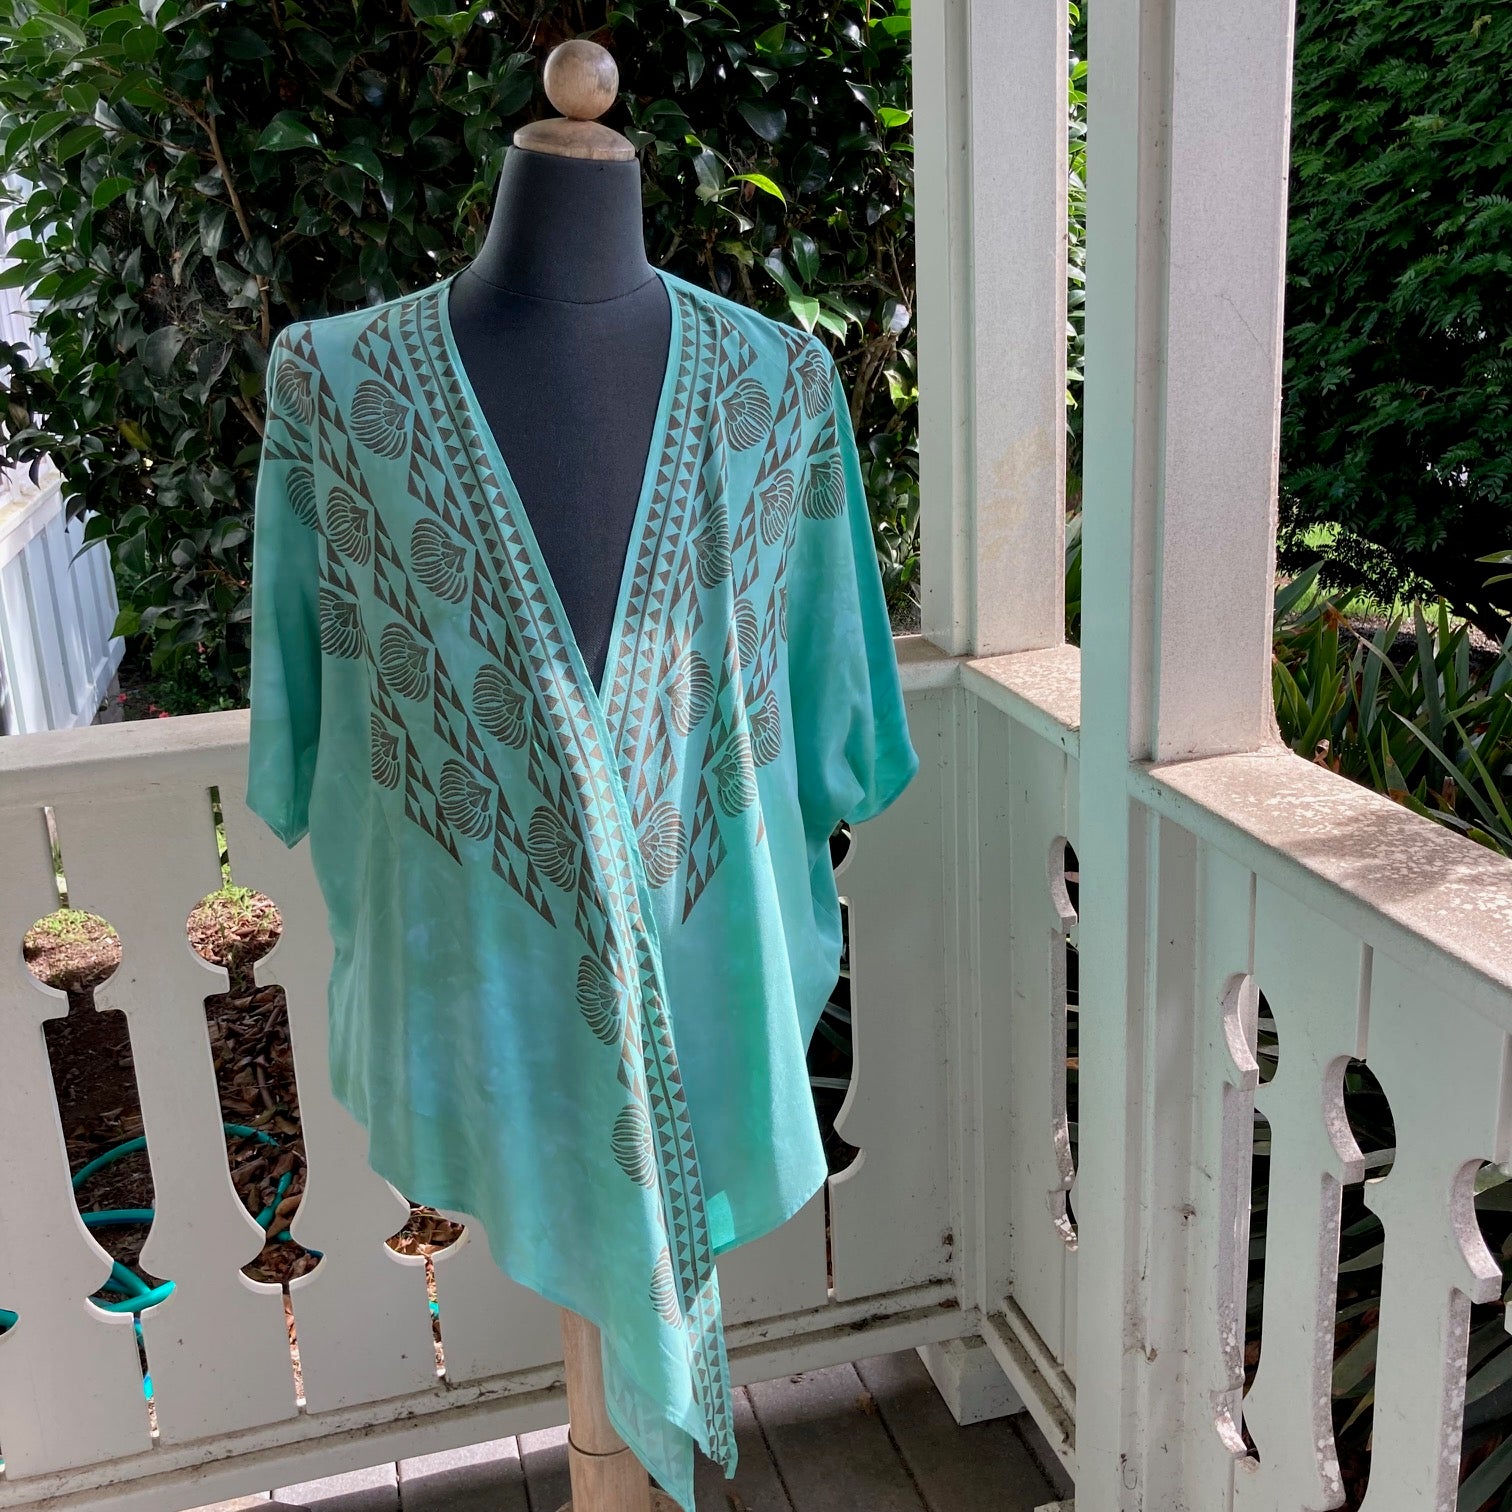 Ohe Kapala TIE Blouse in Mint Green with Mauna and Lehua